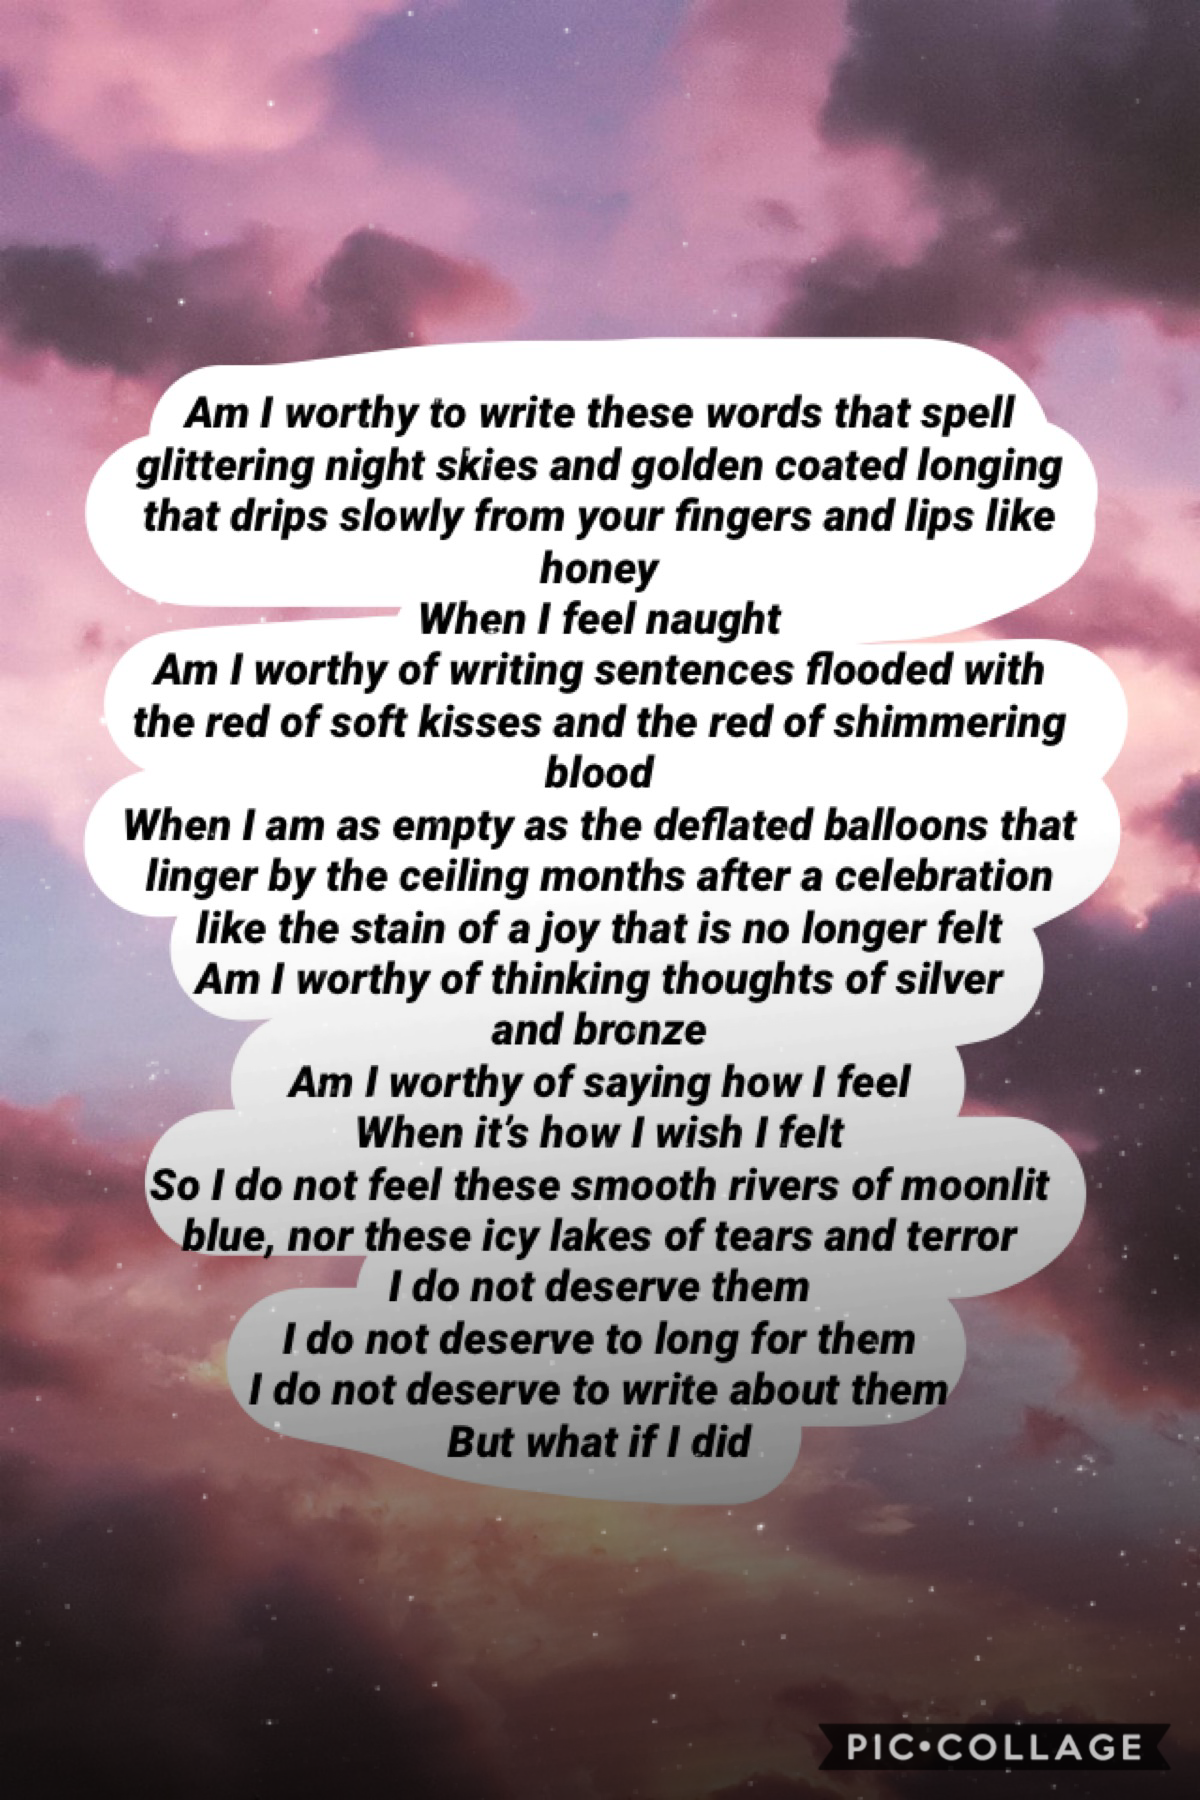 Tap if you like brownies
YAS👏🏻👏🏻👏🏻
So this one’s kinda meh
I like some parts of it but other parts of it I dislike but don’t know how to fix
The poem is basically about how I like to write about feeling emotions I hardly experience myself but enjoy writin